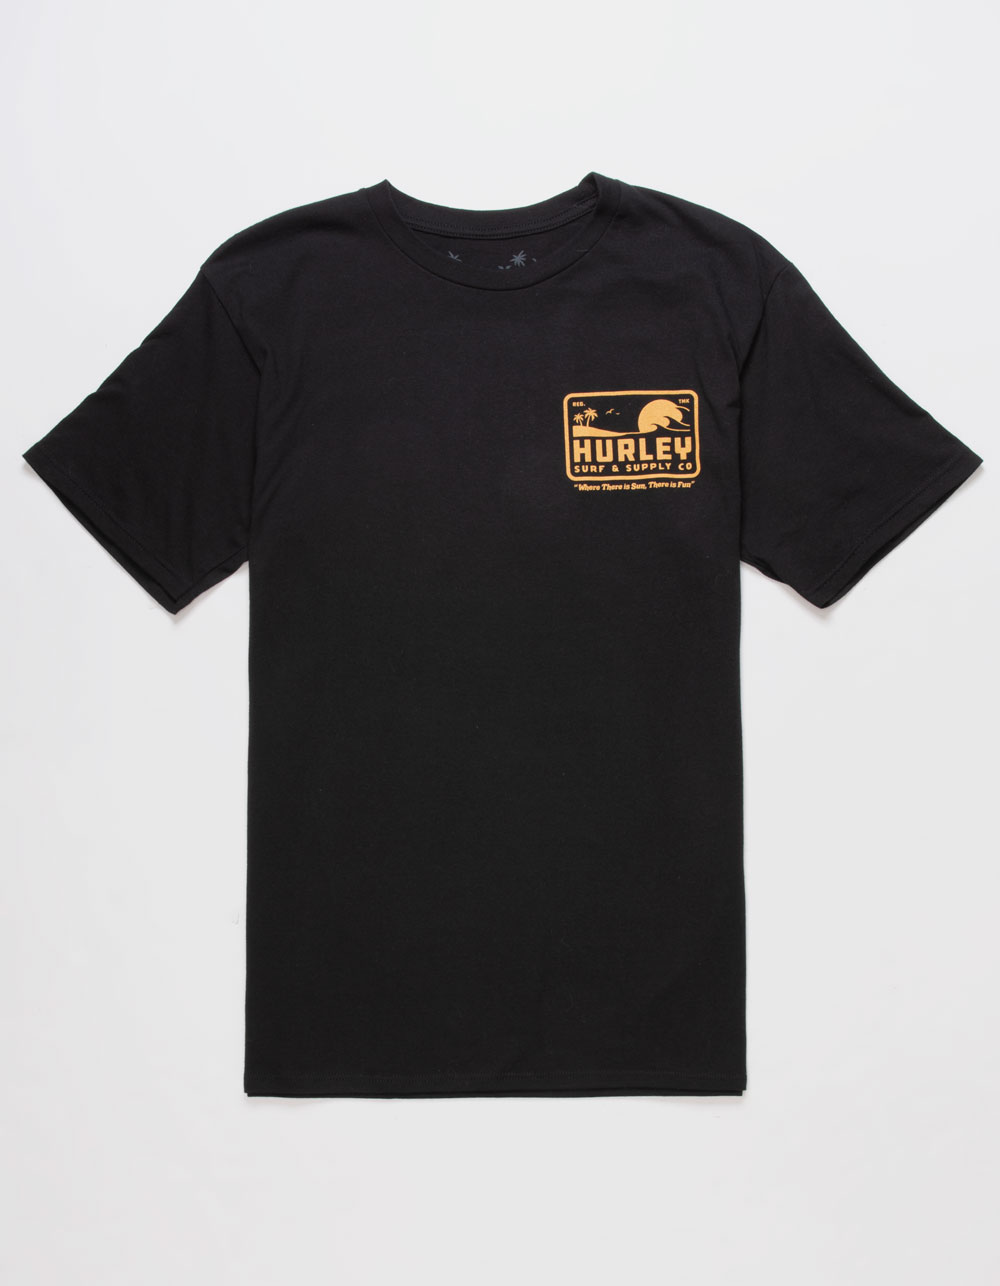 HURLEY Surf And Supply Mens Tee